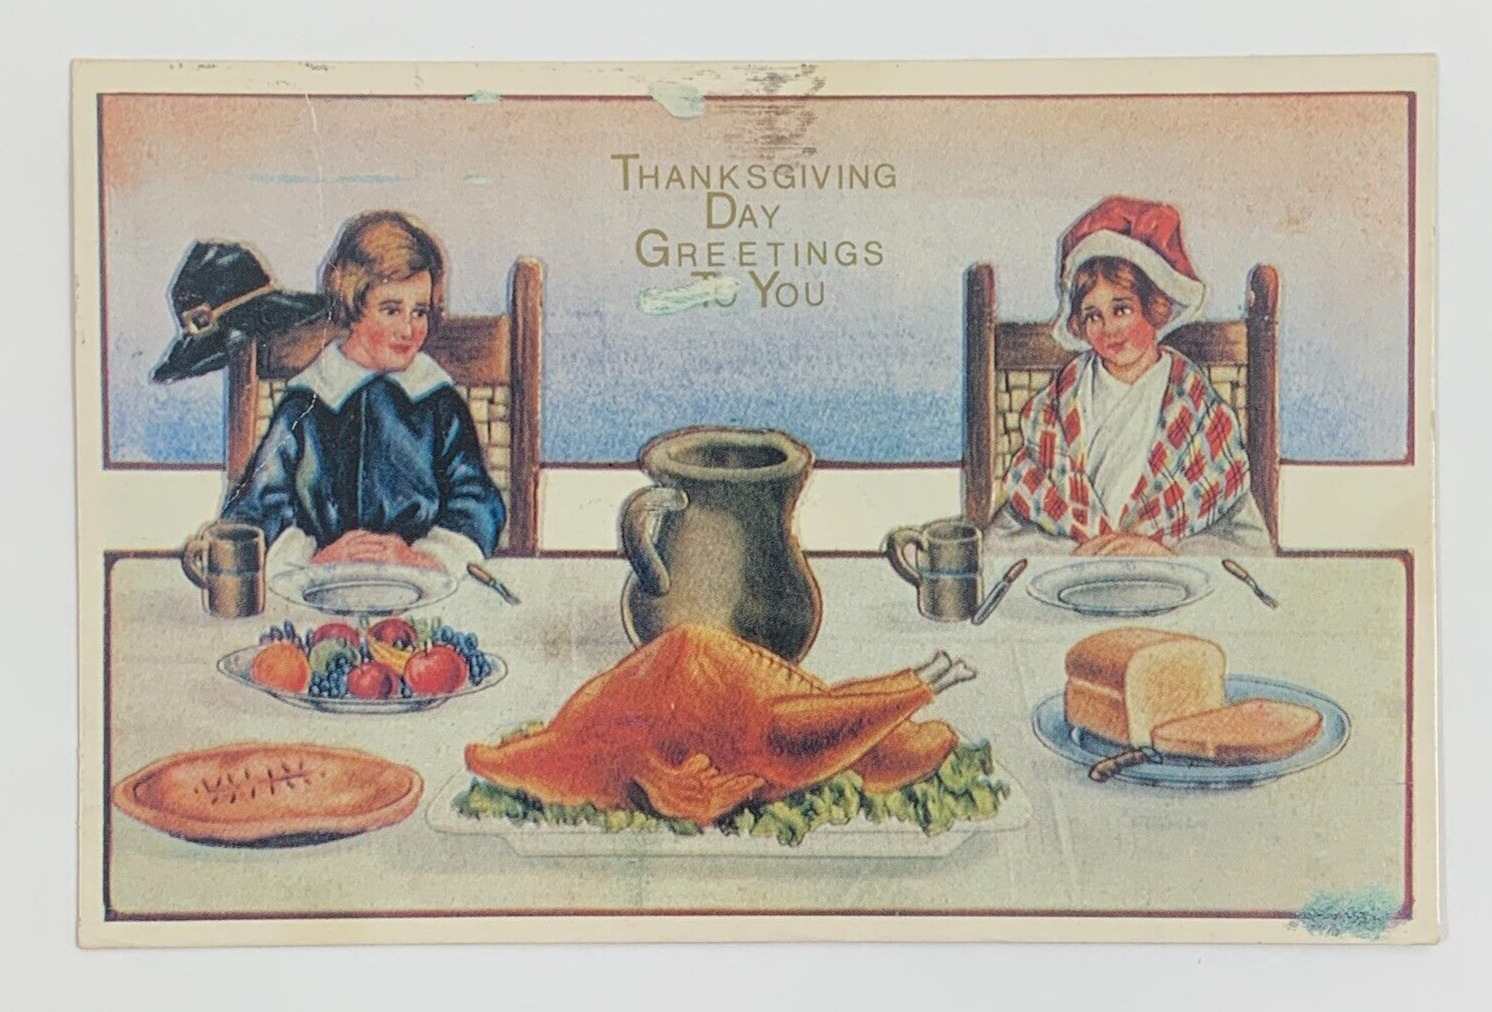 Thanksgiving Day Greetings to You Postcard Vintage Used Posted